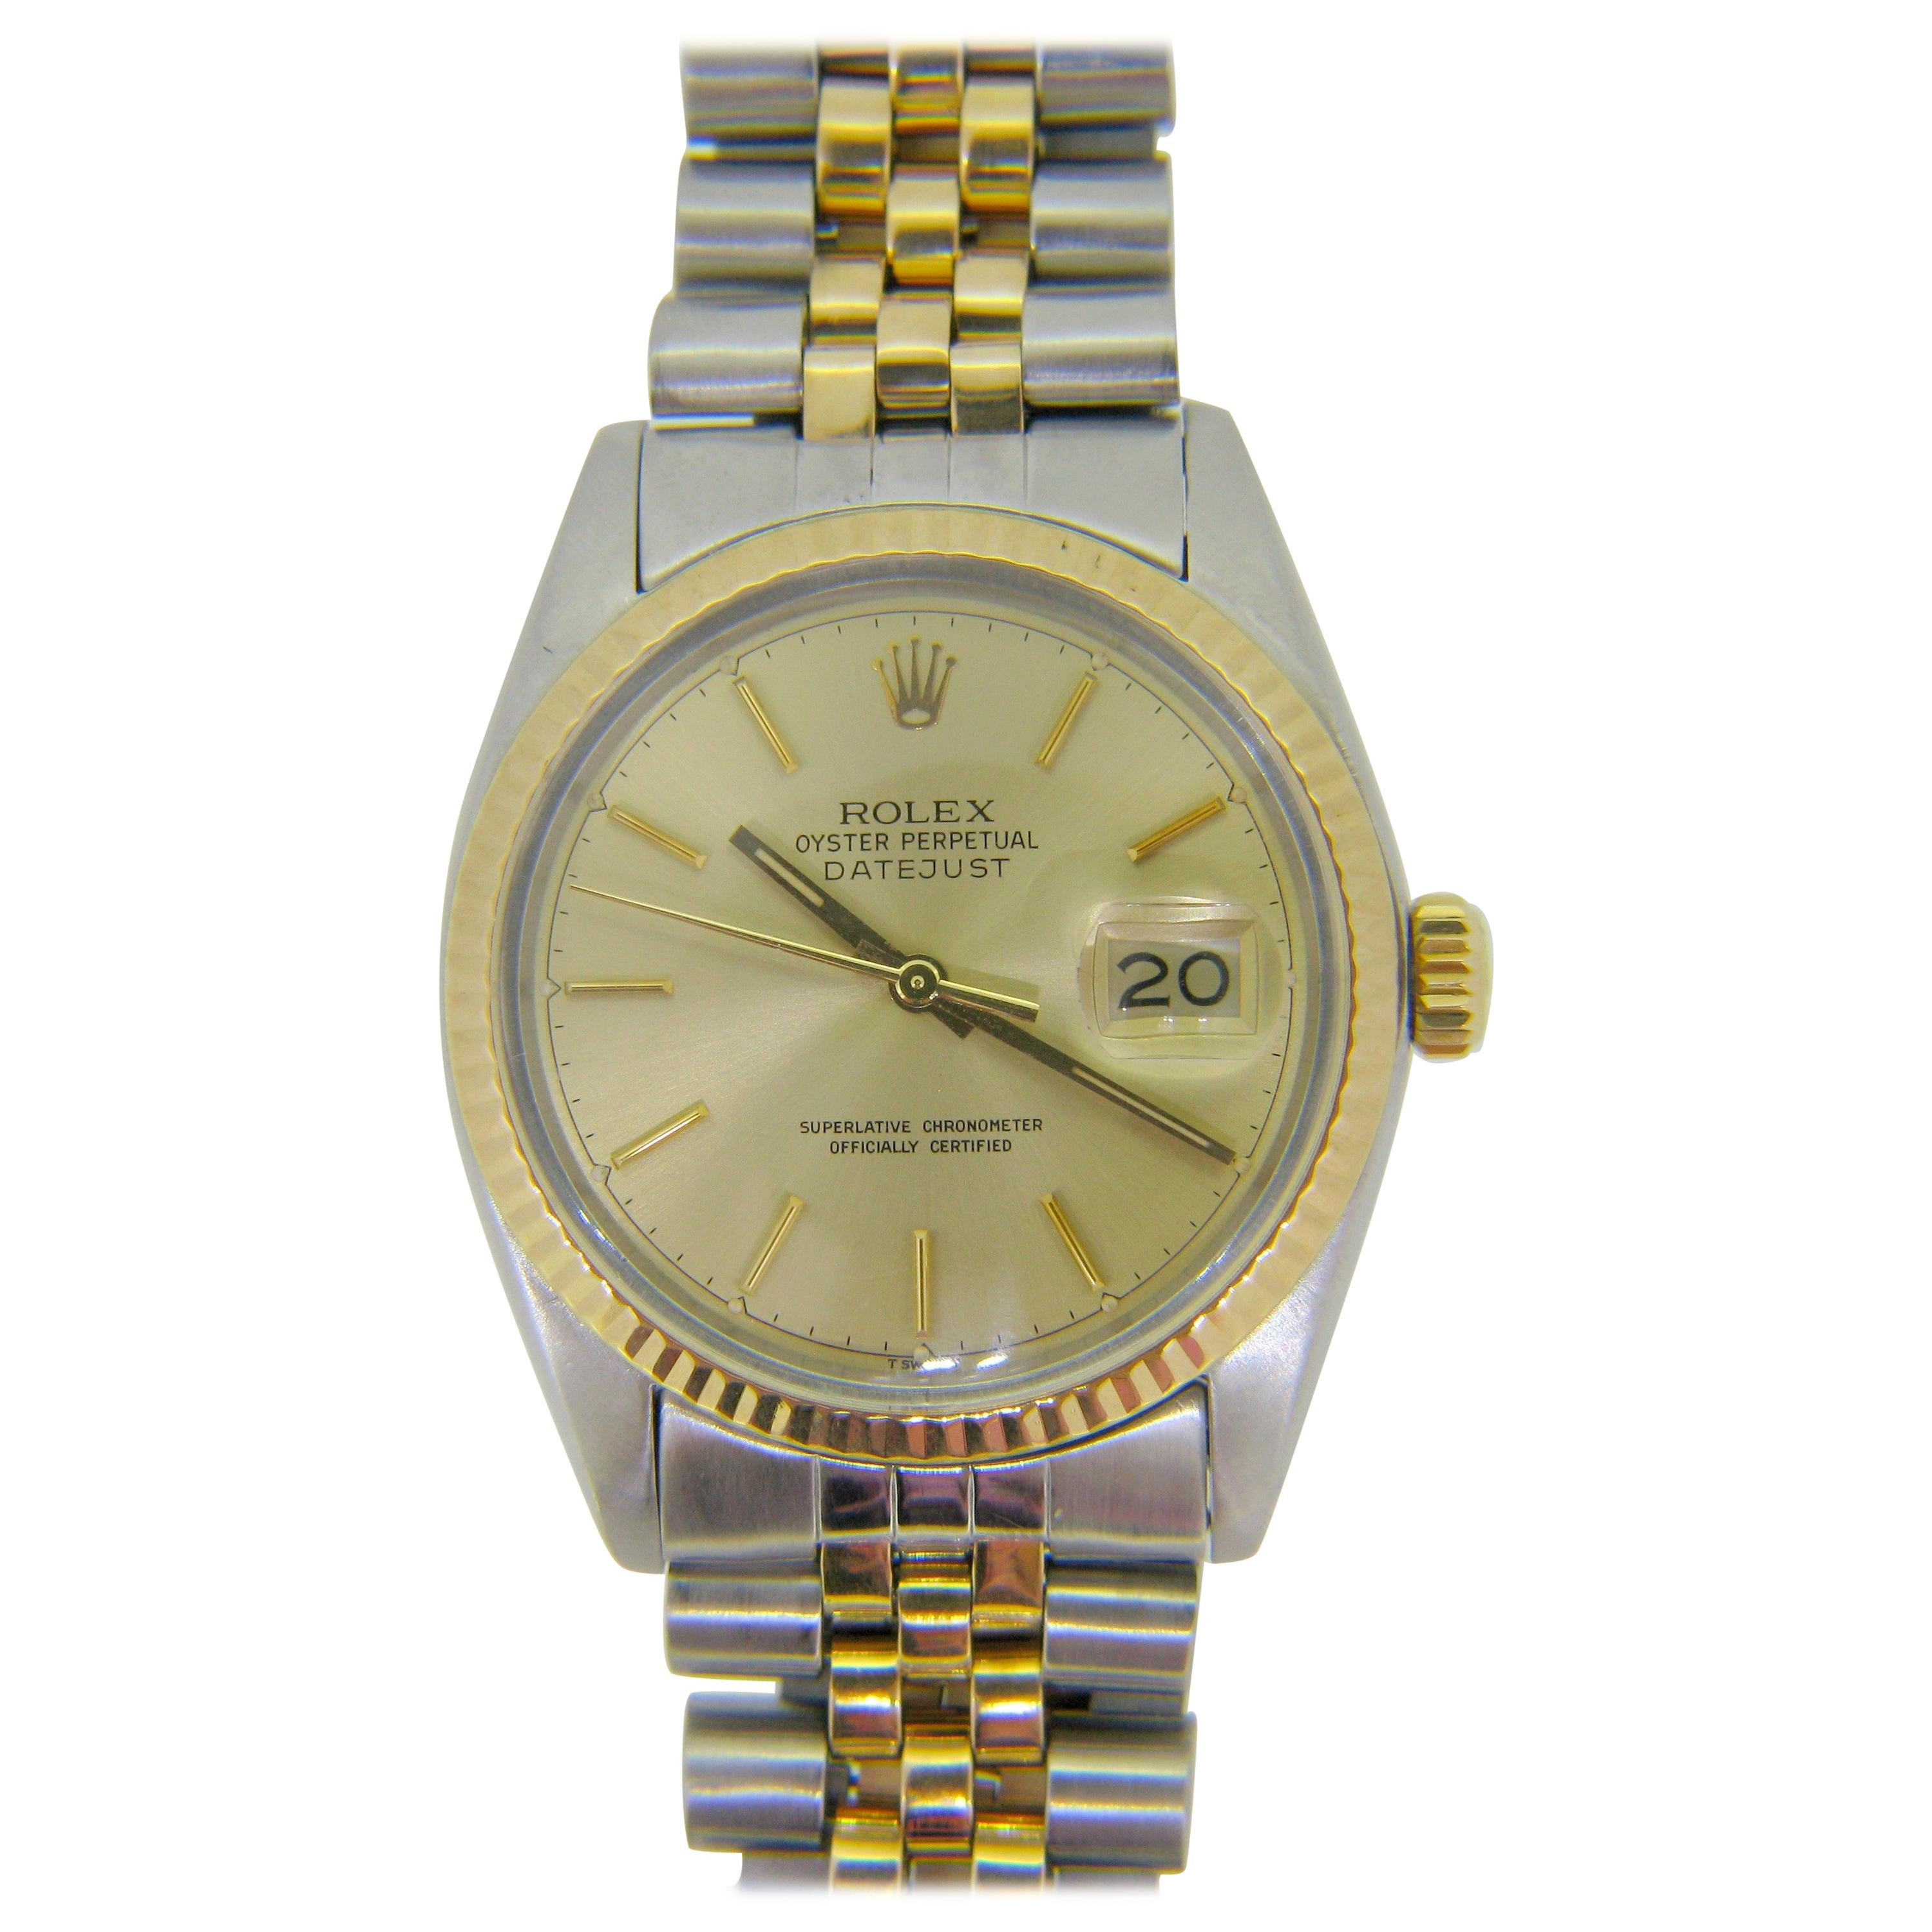 Rolex Oyster Datejust Perpetual 1978 Yellow Gold Stainless Steel Watch